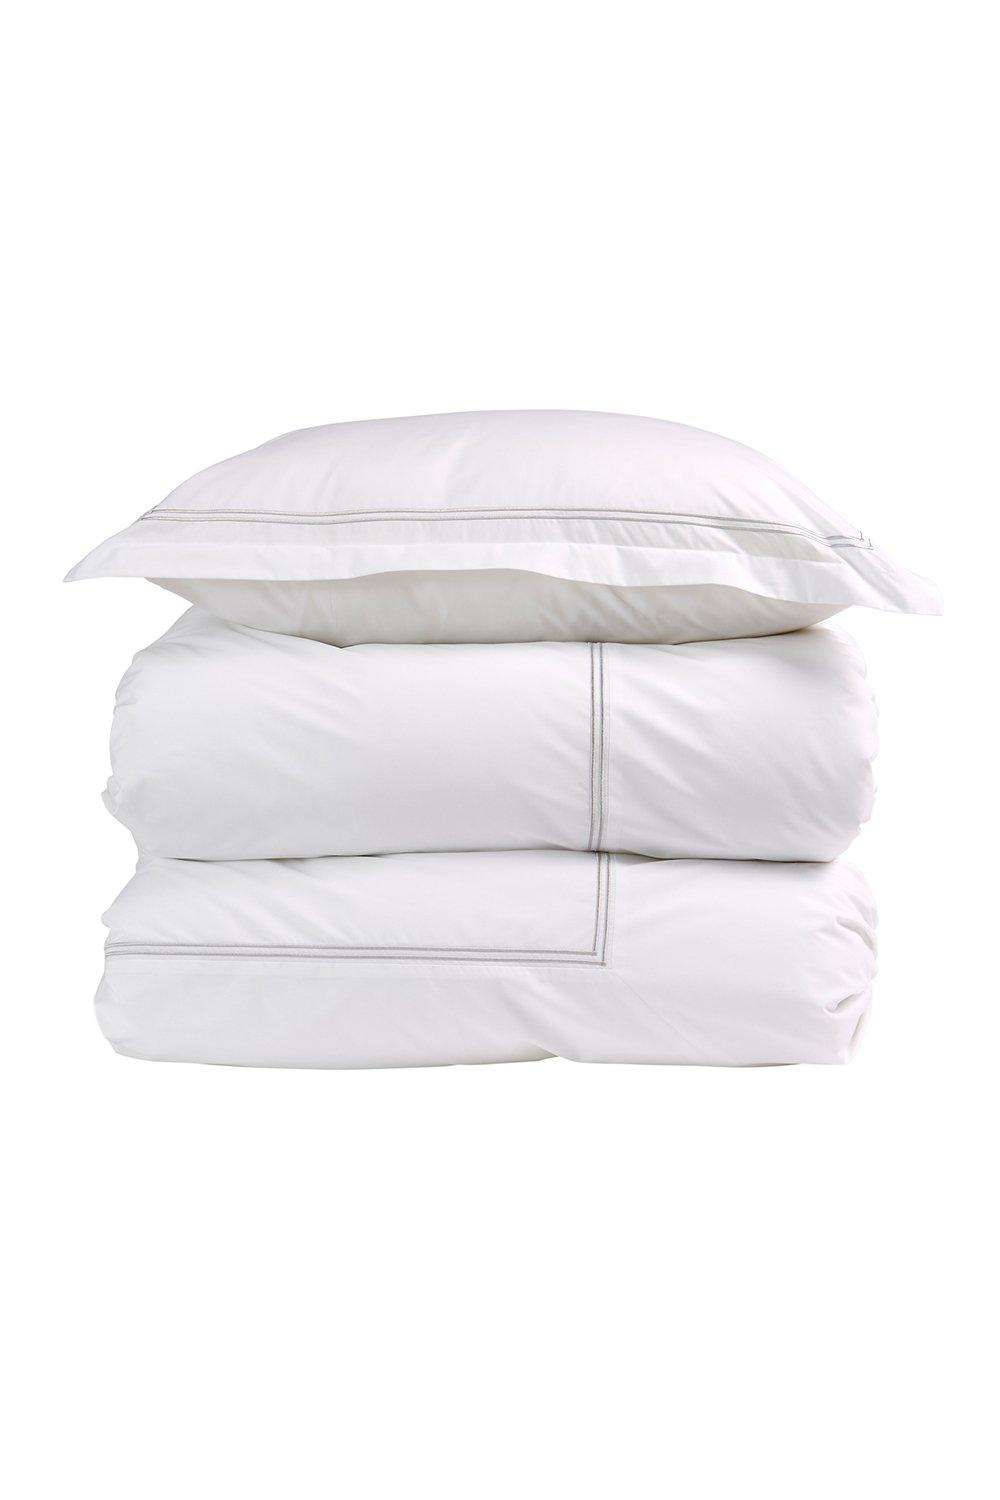 'Derwent' Luxury Cotton Percale Embroidered Duvet Cover Sets